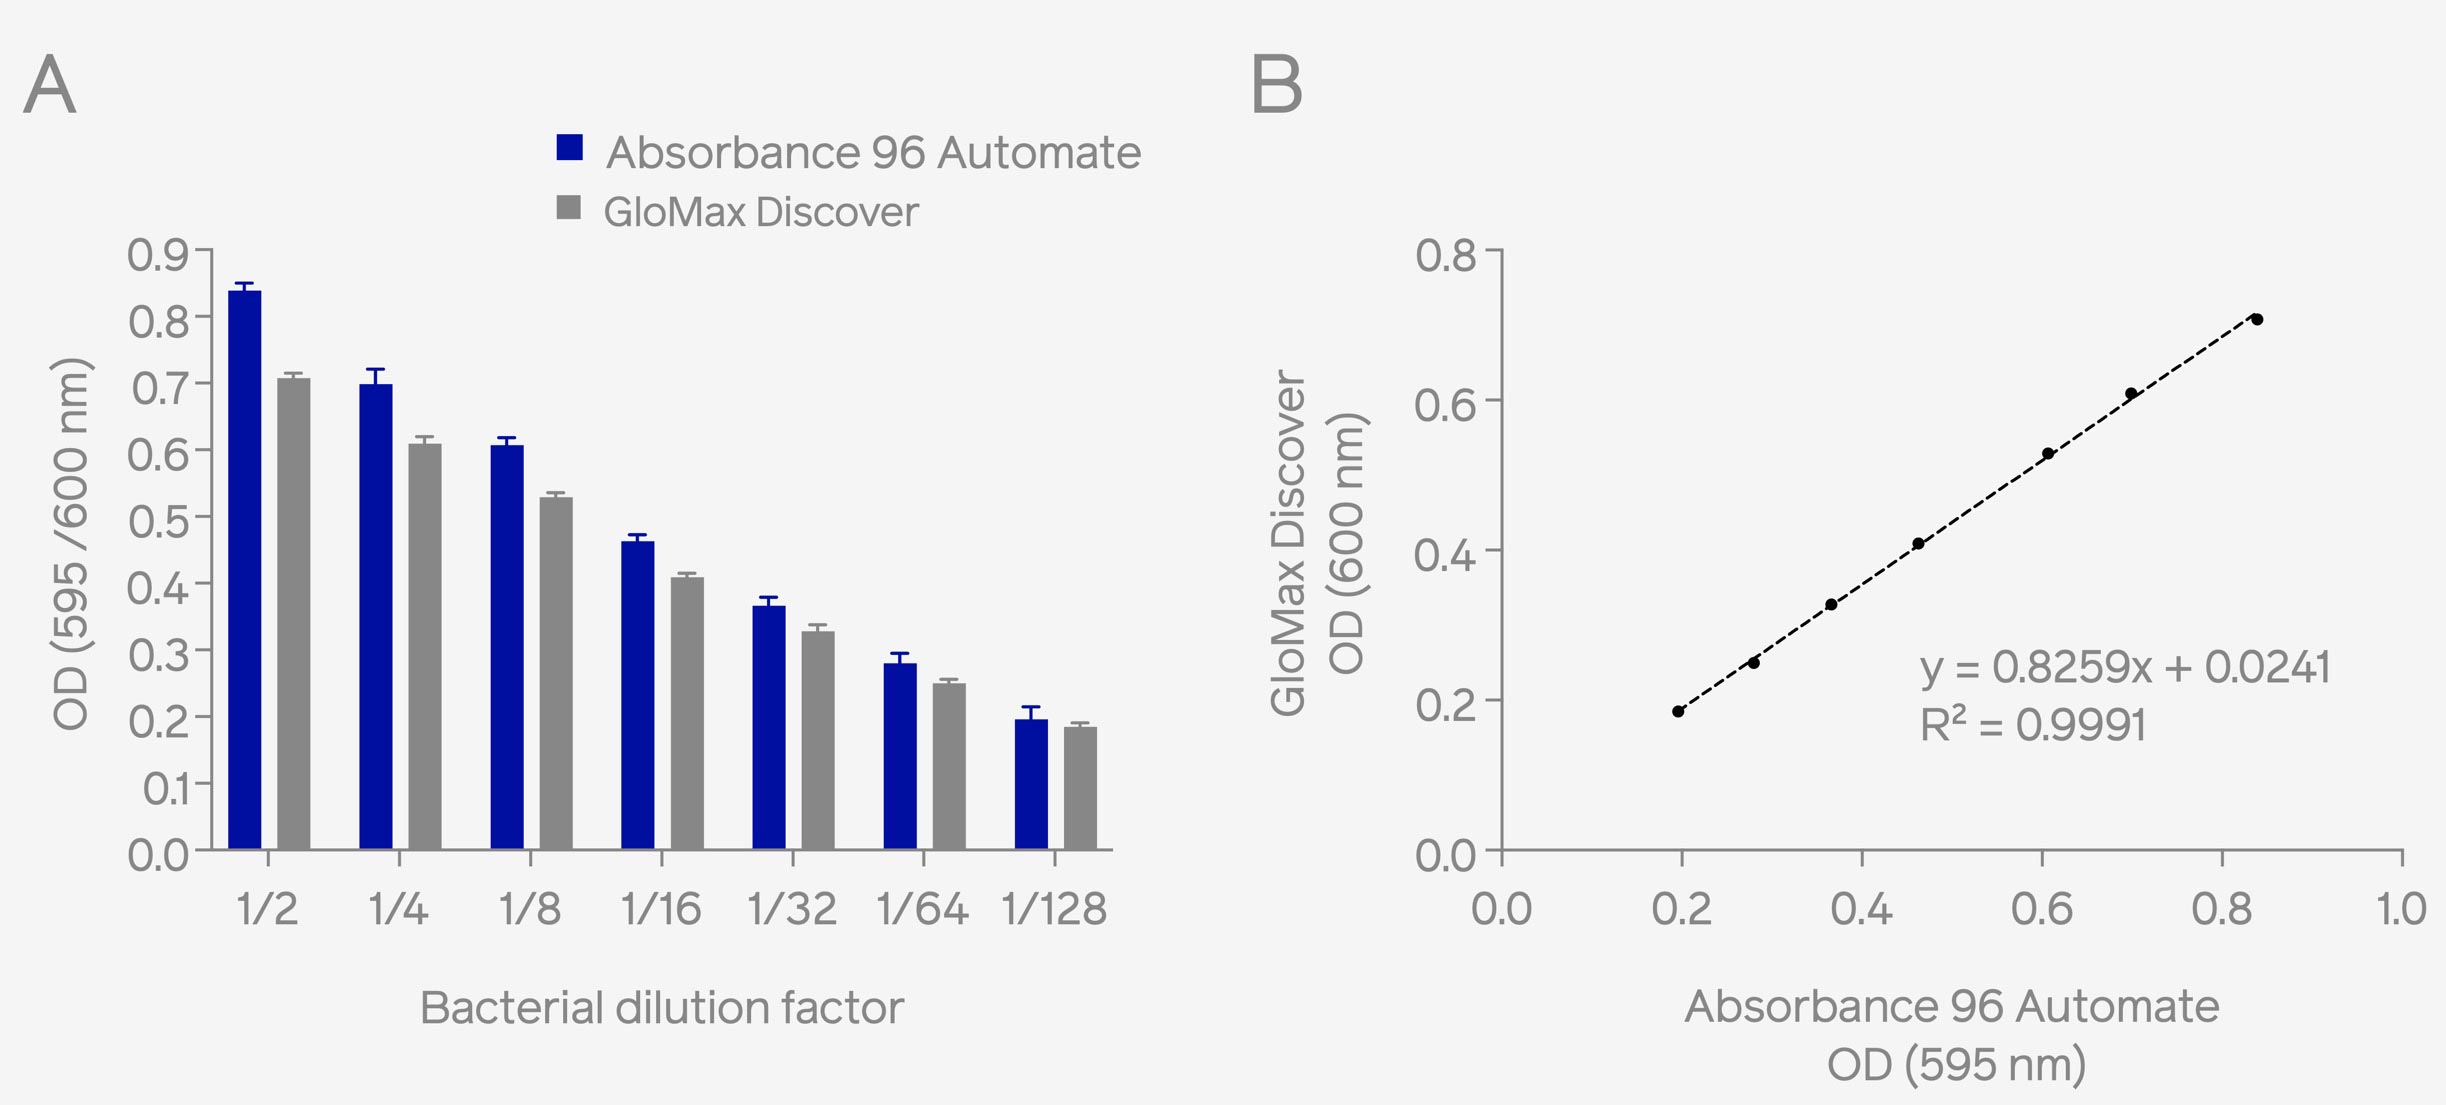 Fig. 1: Different bacterial samples were prepared, and absorbance was measured either at 595 nm using Absorbance 96 Automate or at 600 nm with GloMax® Discover (A). A high readout correlation was observed between both devices (B), suggesting identical reproducibility, sensitivity, and linearity across the dynamic range. Accelerate Bacterial Growth Measurement with Integrated Absorbance 96 Automate – Eppendorf epMotion® Automated Workflow Byonoy